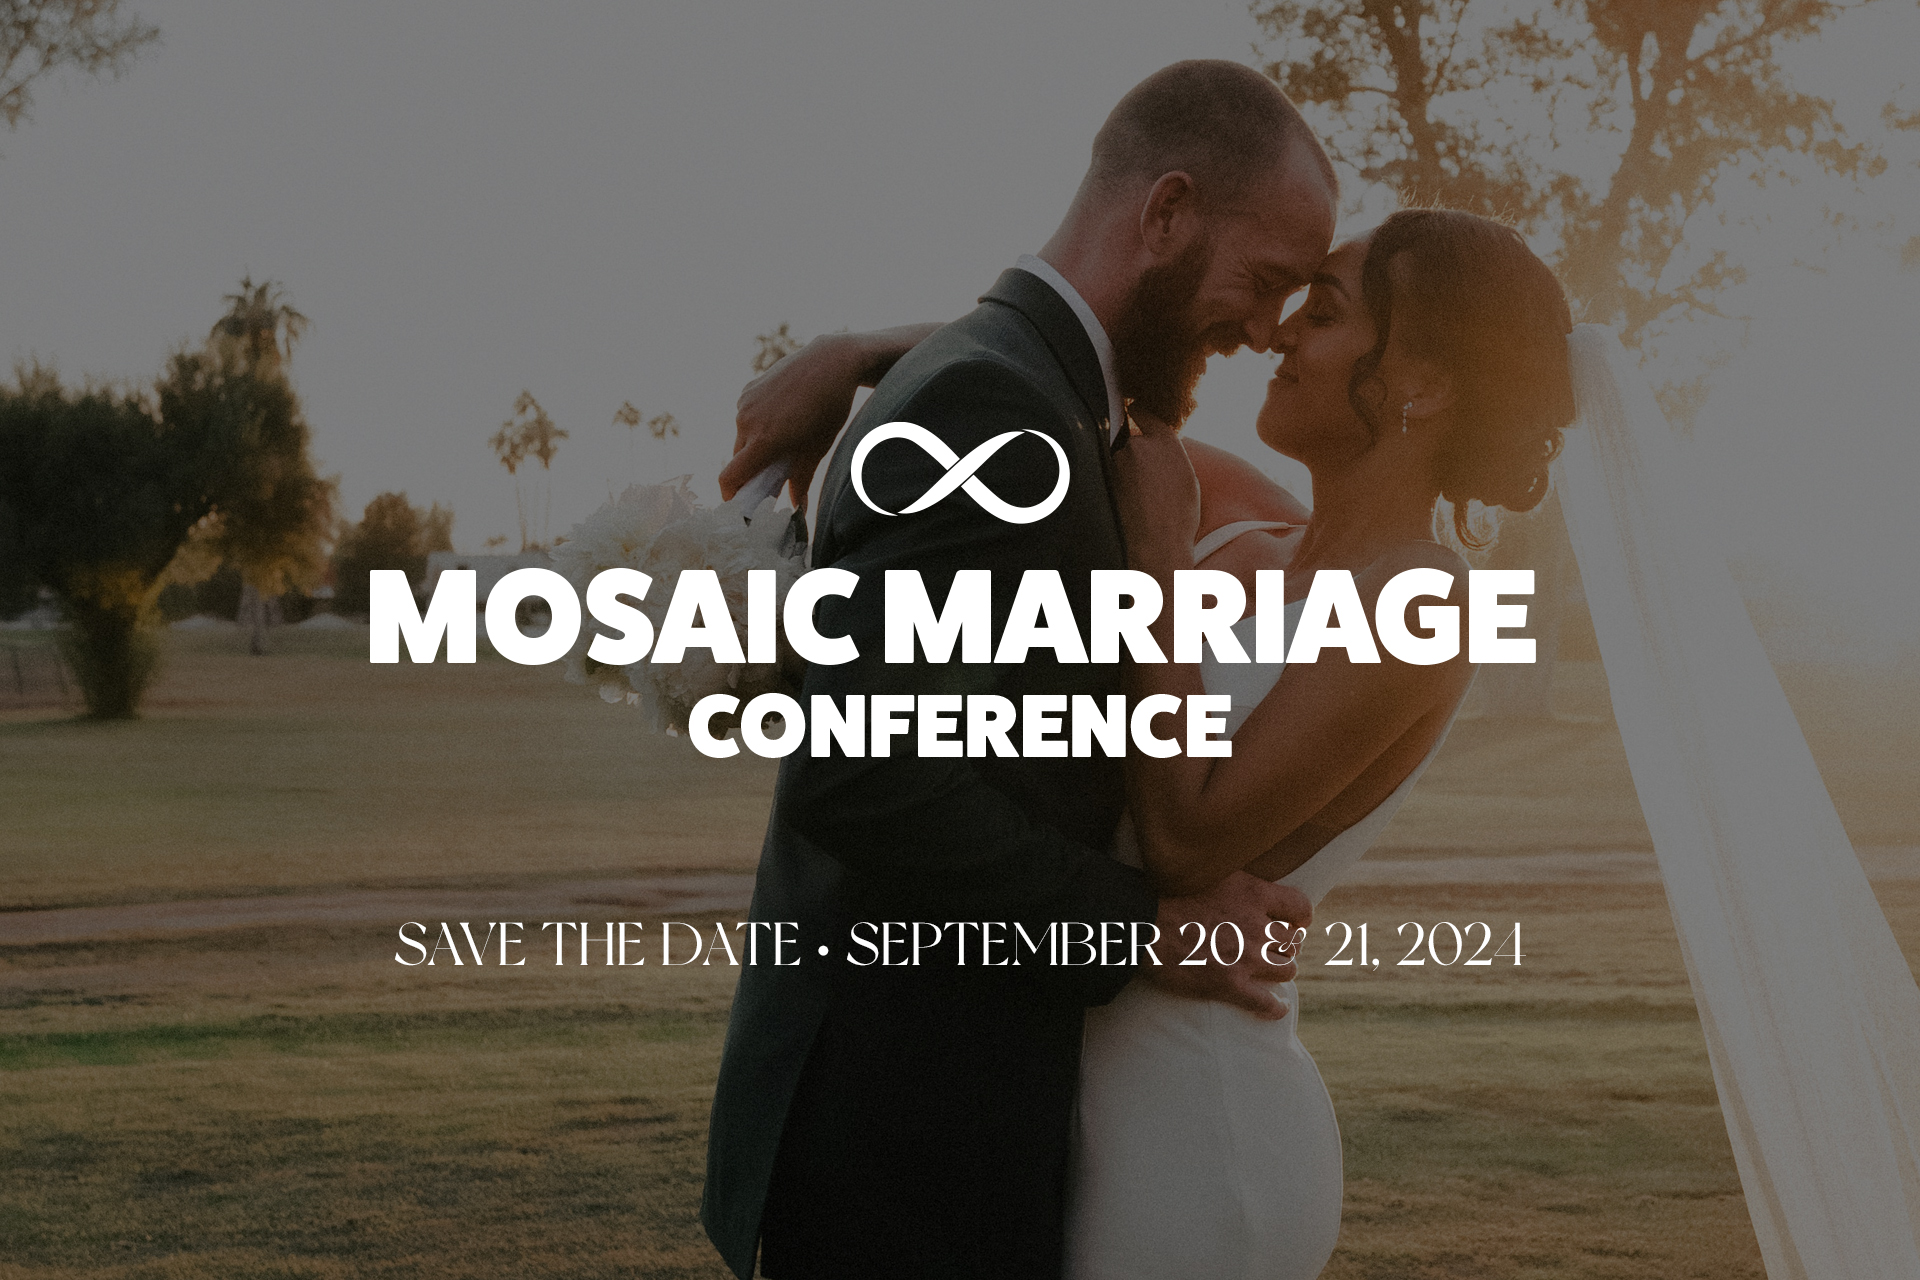 Mosaic Marriage Conference